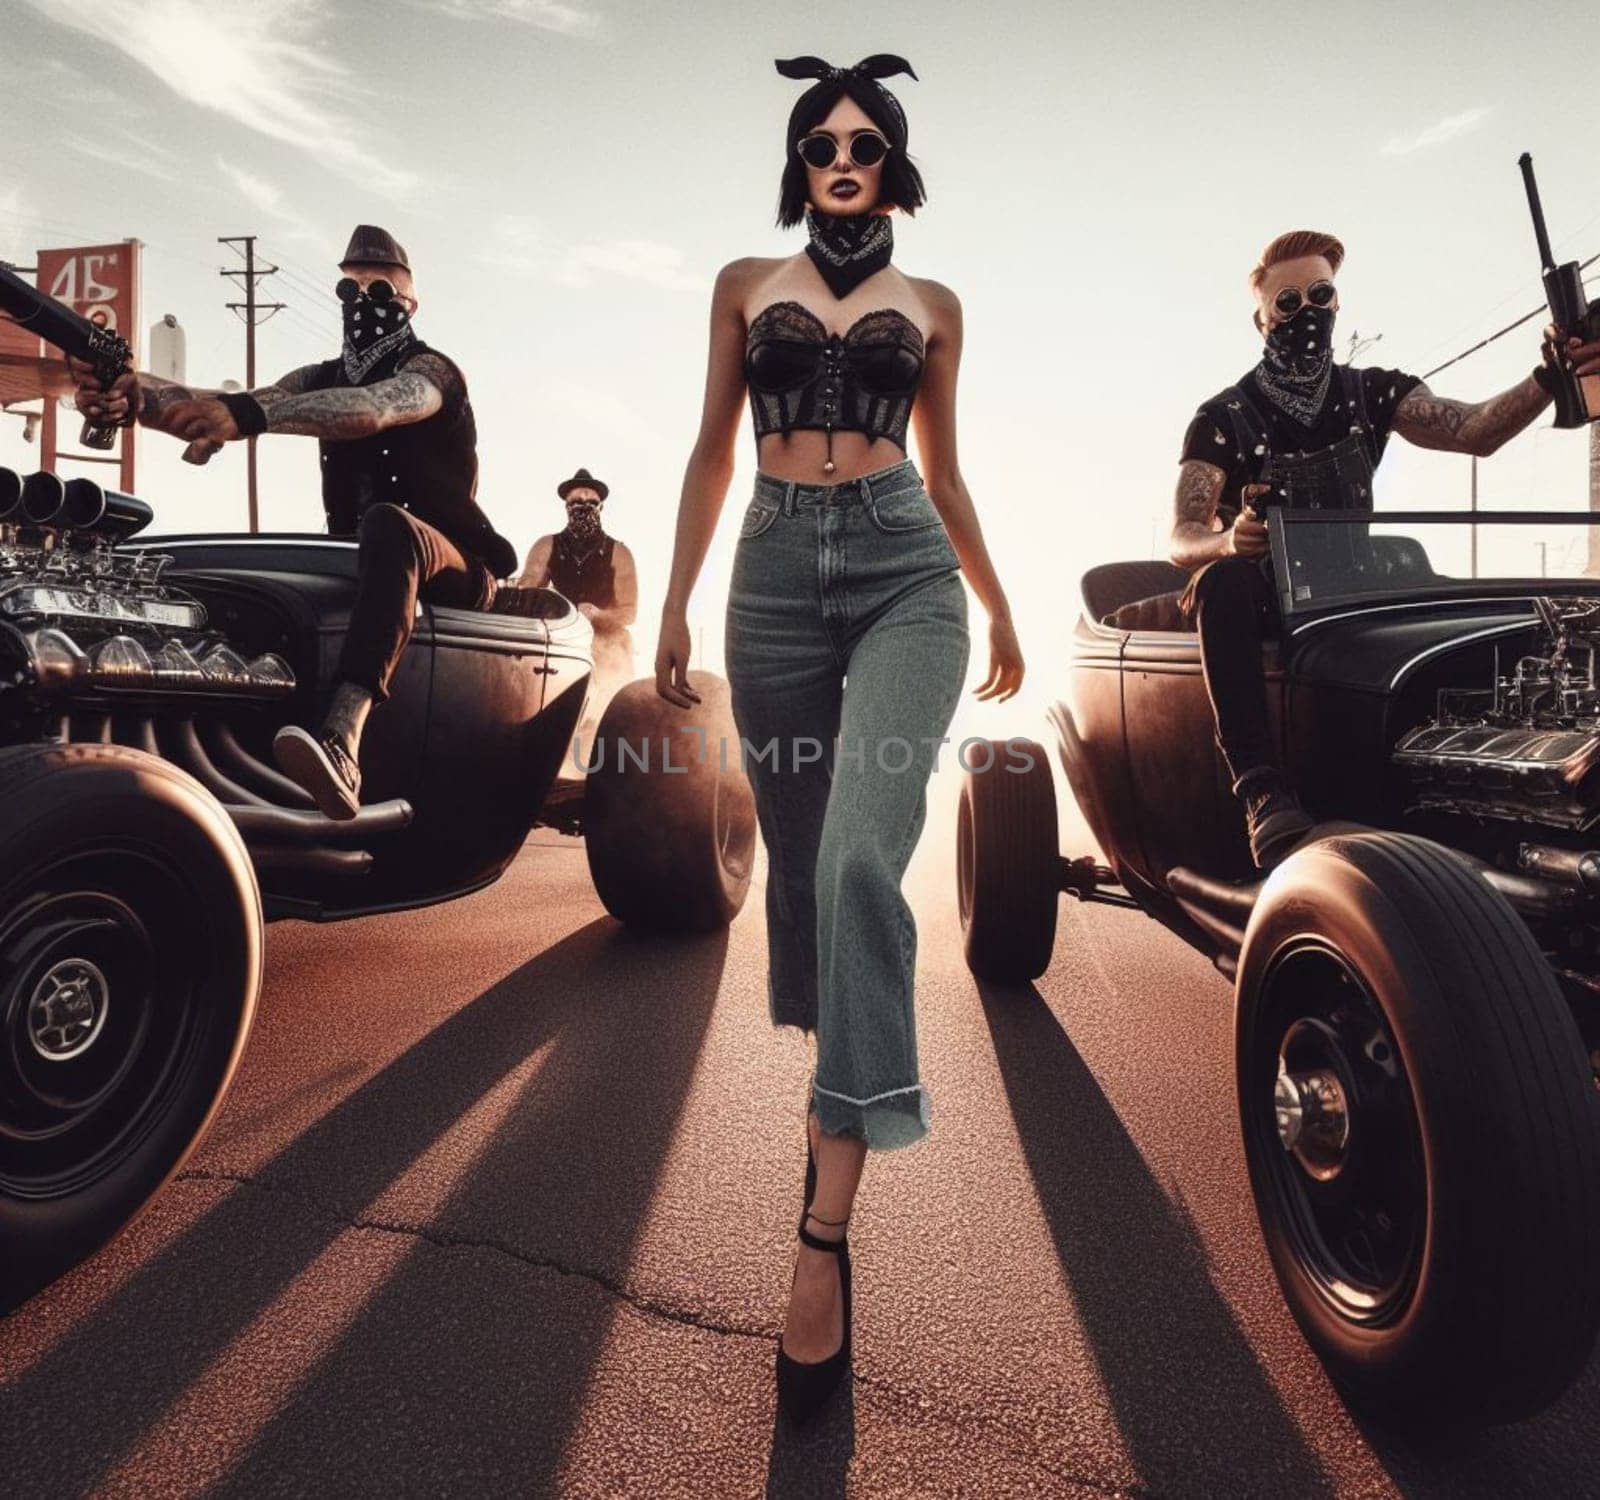 pinup girl, punk vandals gang wear jeans, leather, drive hotrods, bikes, escape gas station, desert by verbano